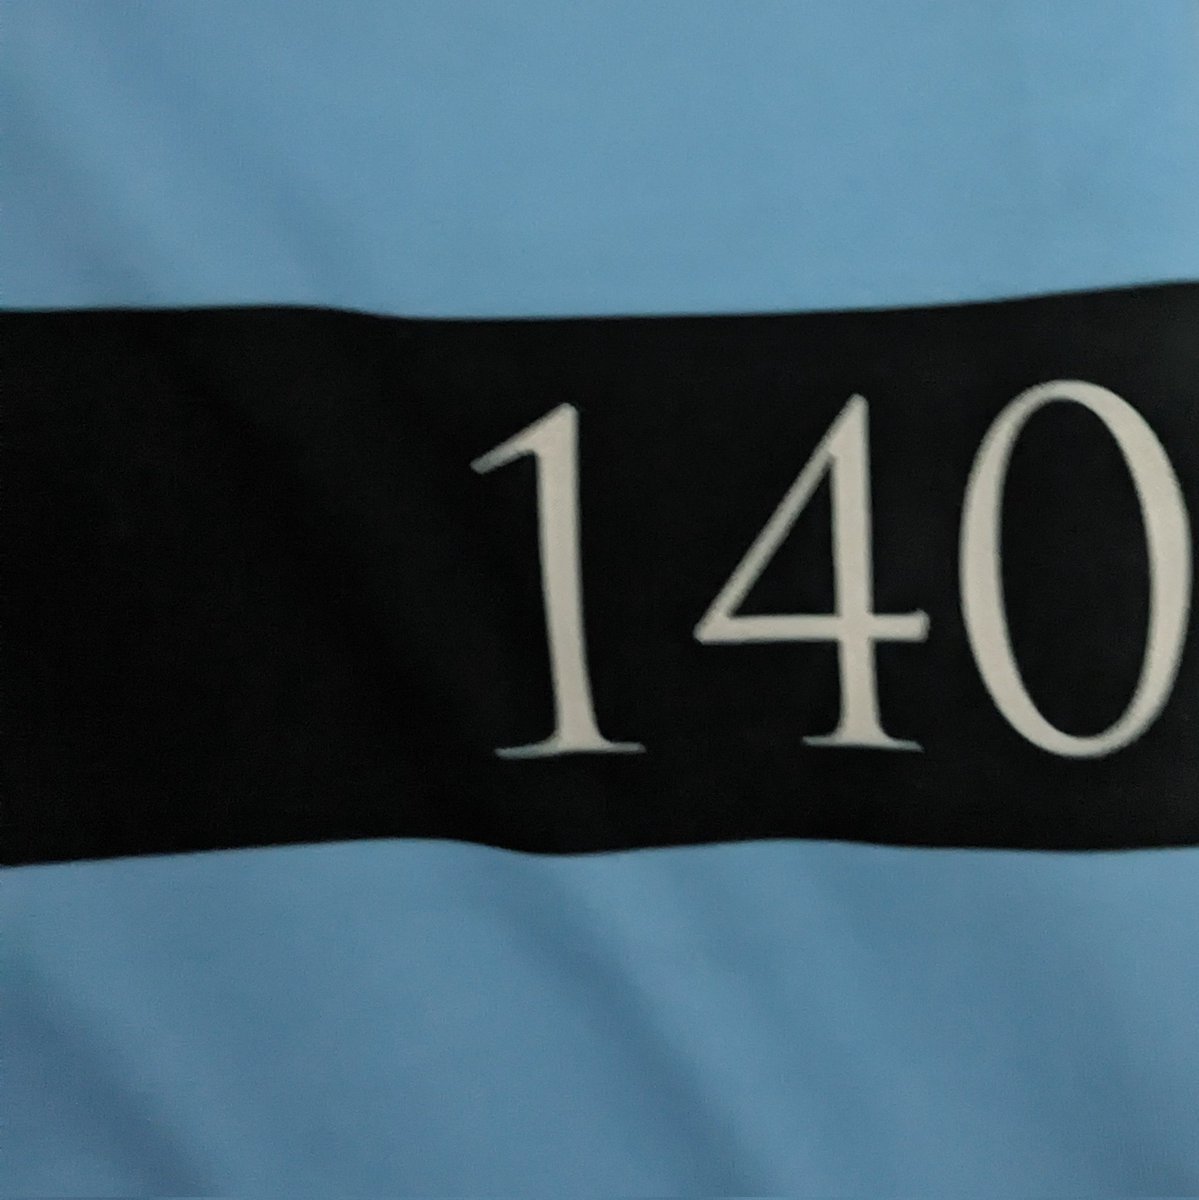 With the latest addition from @classrugbyshirt I can finally add the 100th anniversary jersey to the 125th and 140th ones.

Roll on, 2026, and the 150th 💙🖤

#AlwaysCardiff